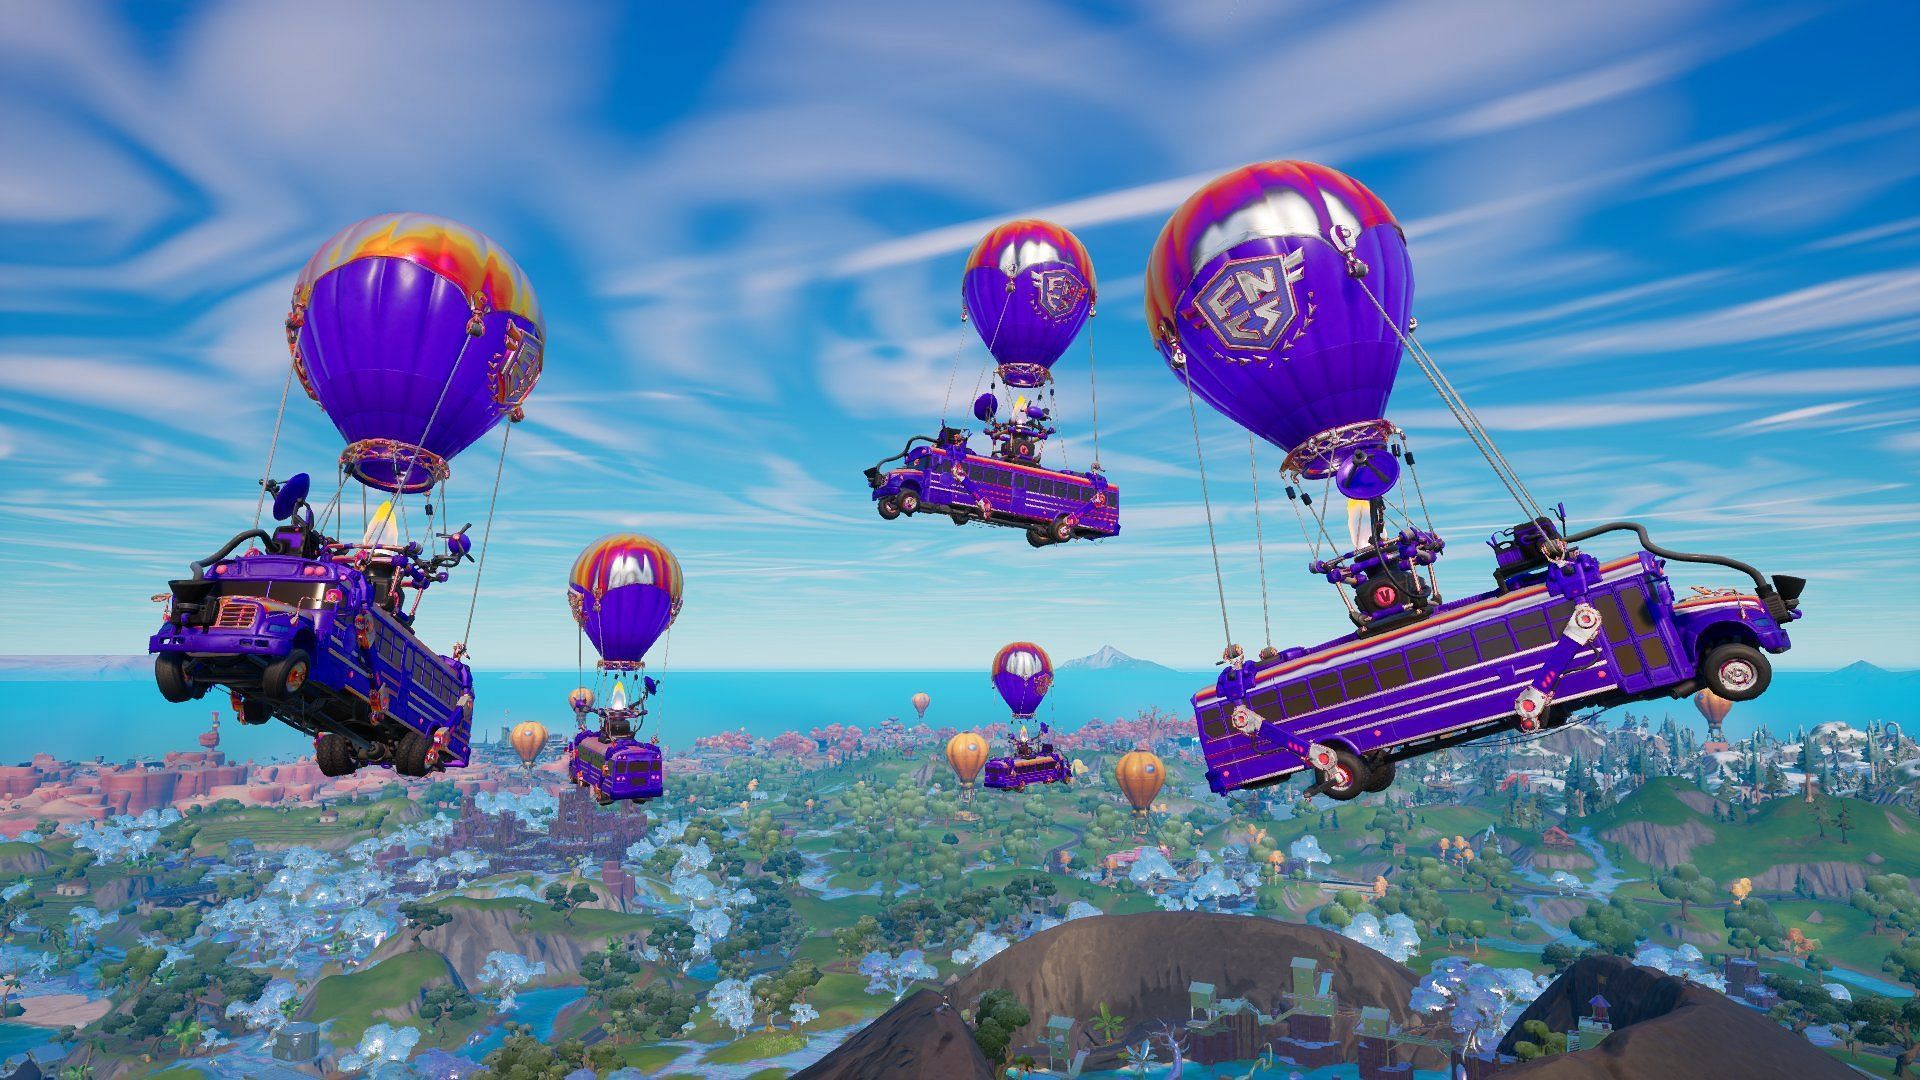 Fortnite players will also get an FNCS-themed bus (Image via Epic Games)